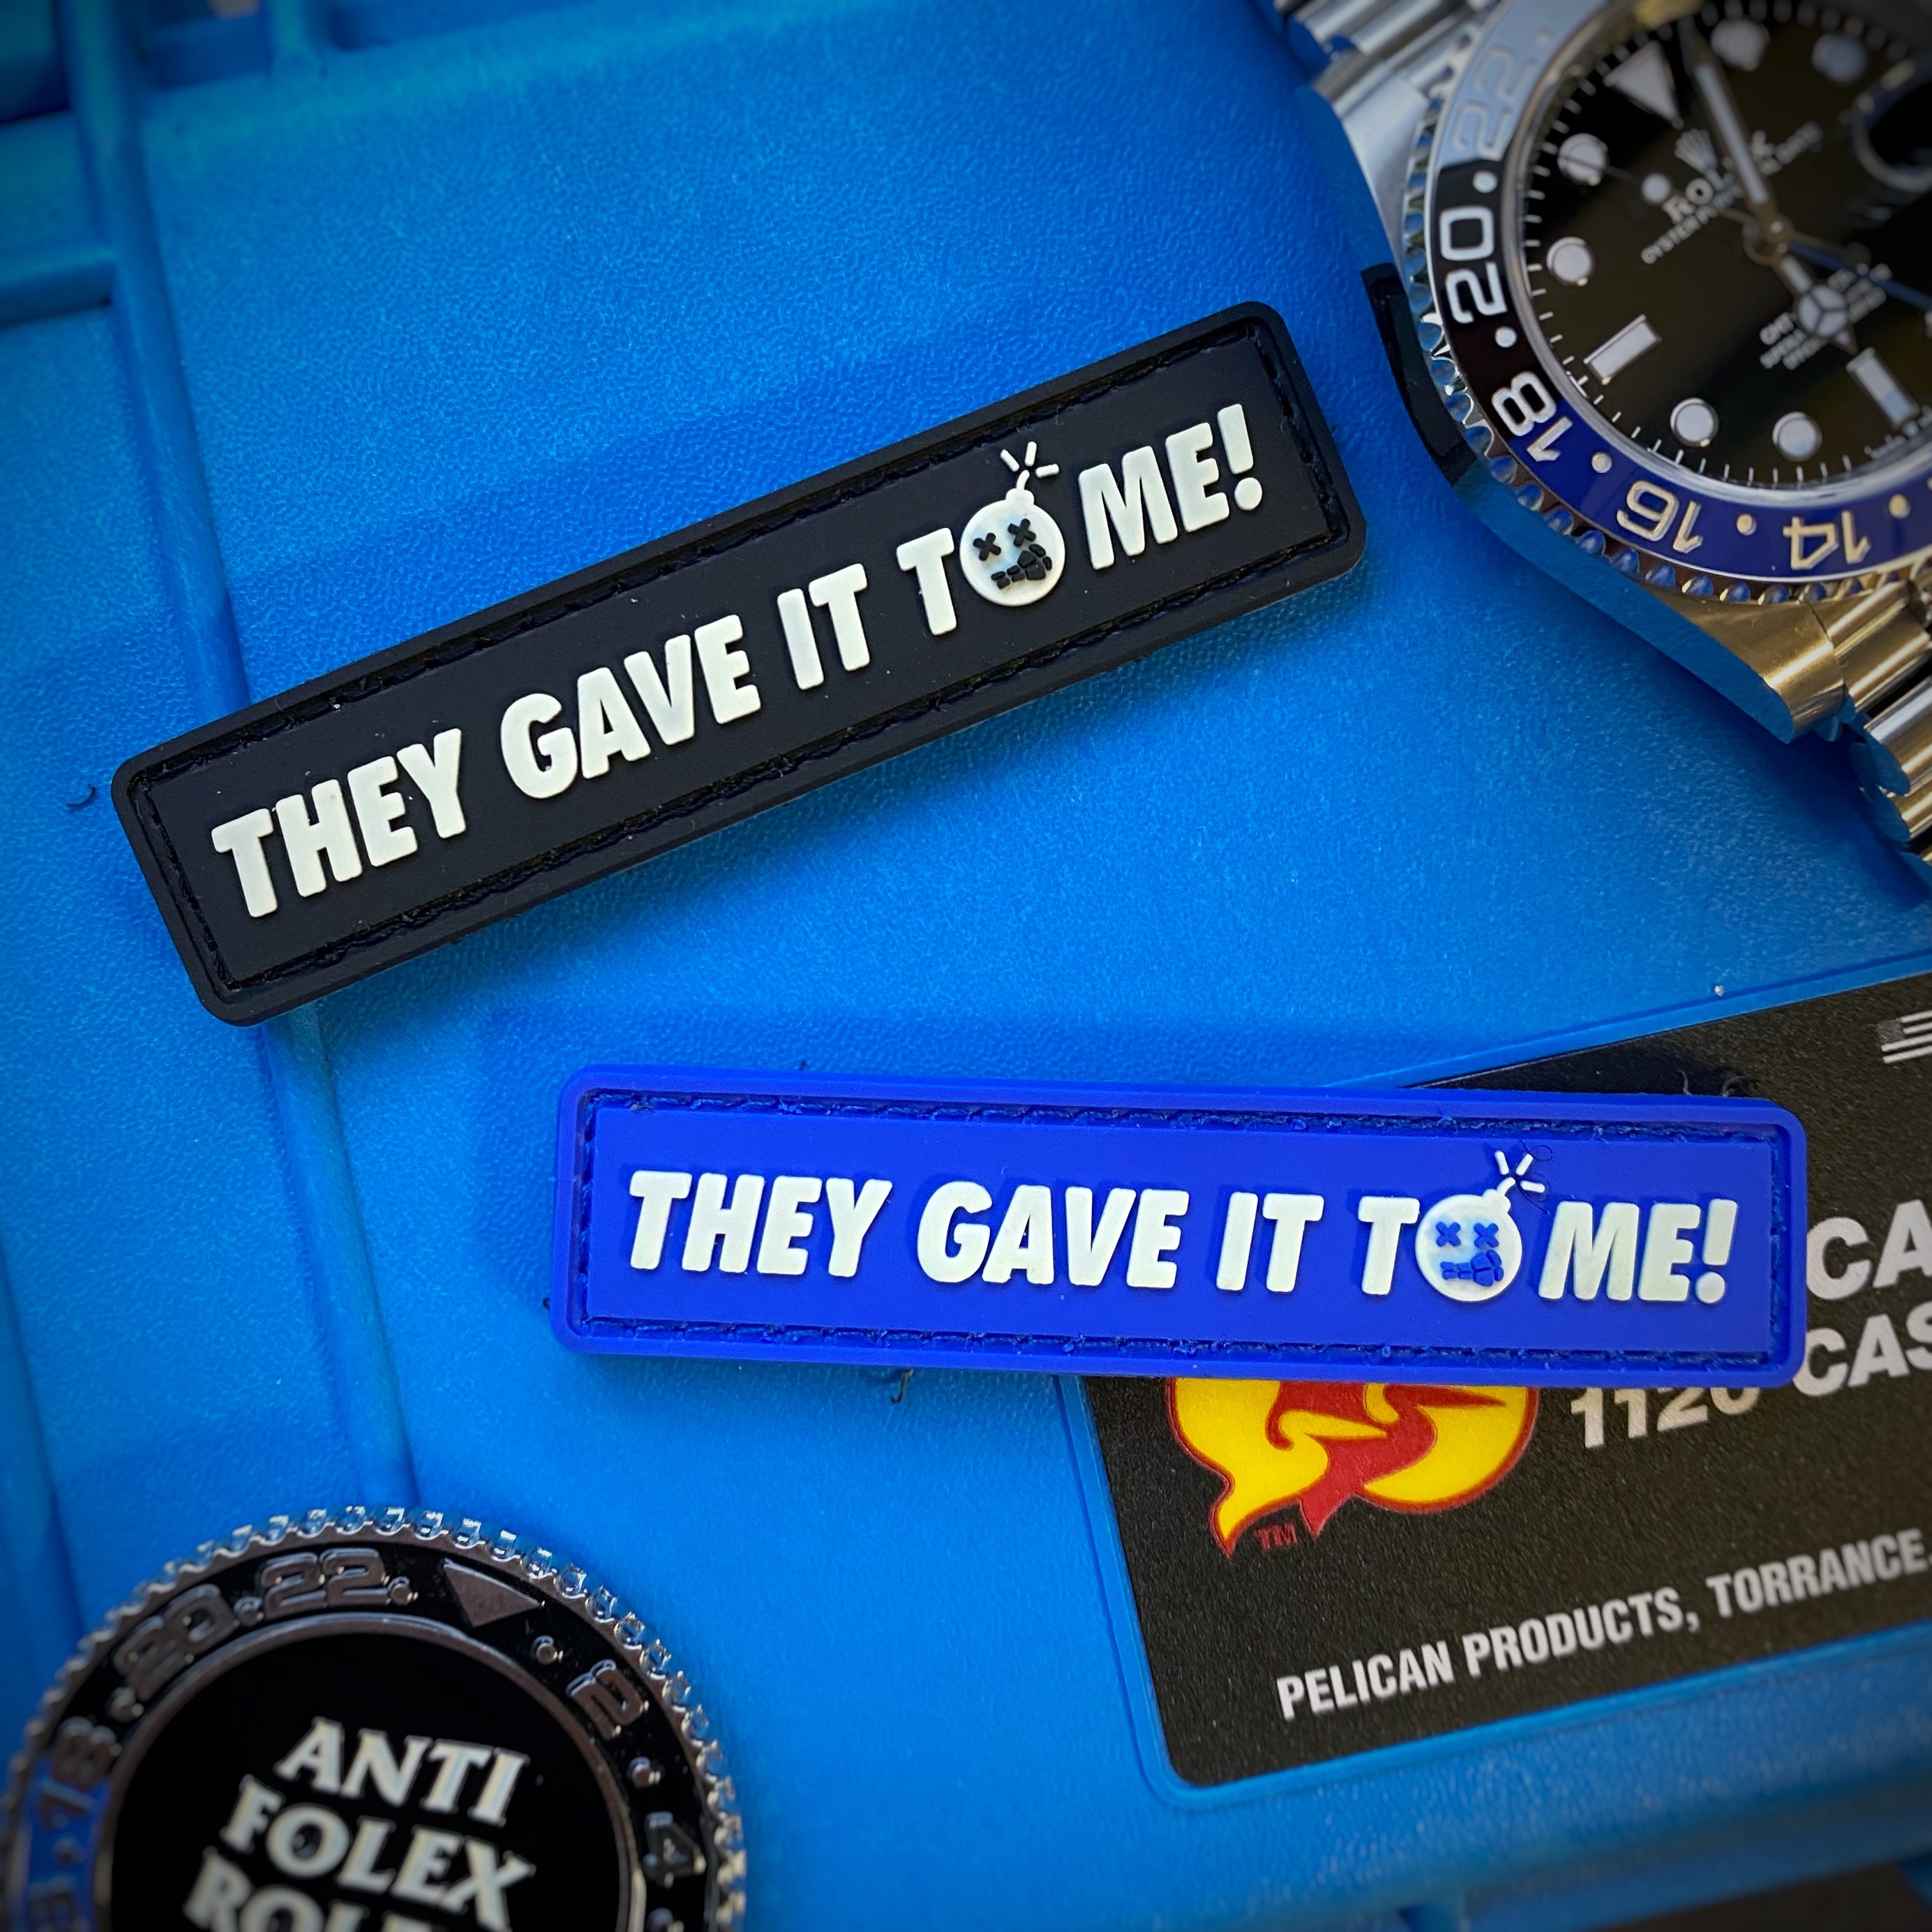 Dangerous Goods® “They Gave It To Me!” PVC Morale Patch